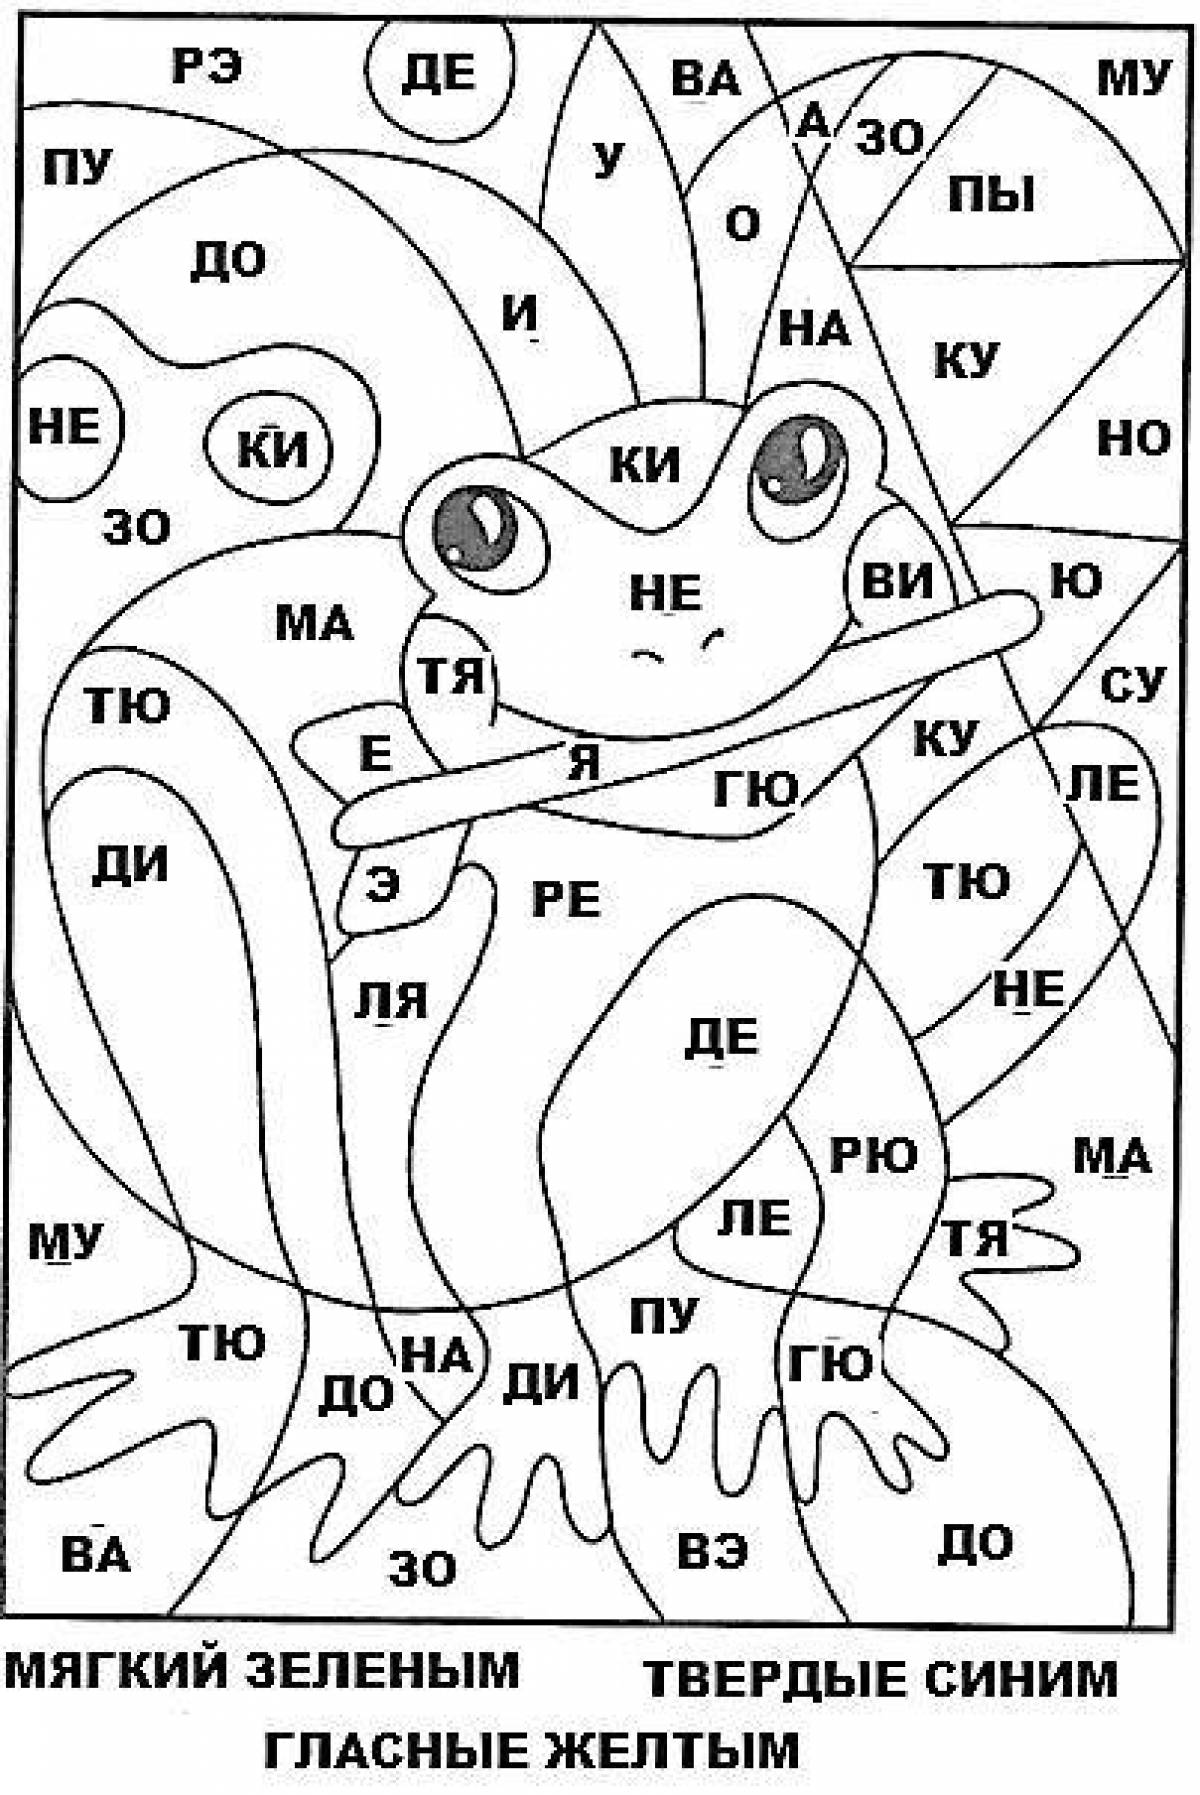 Inviting coloring book in Russian 1st grade